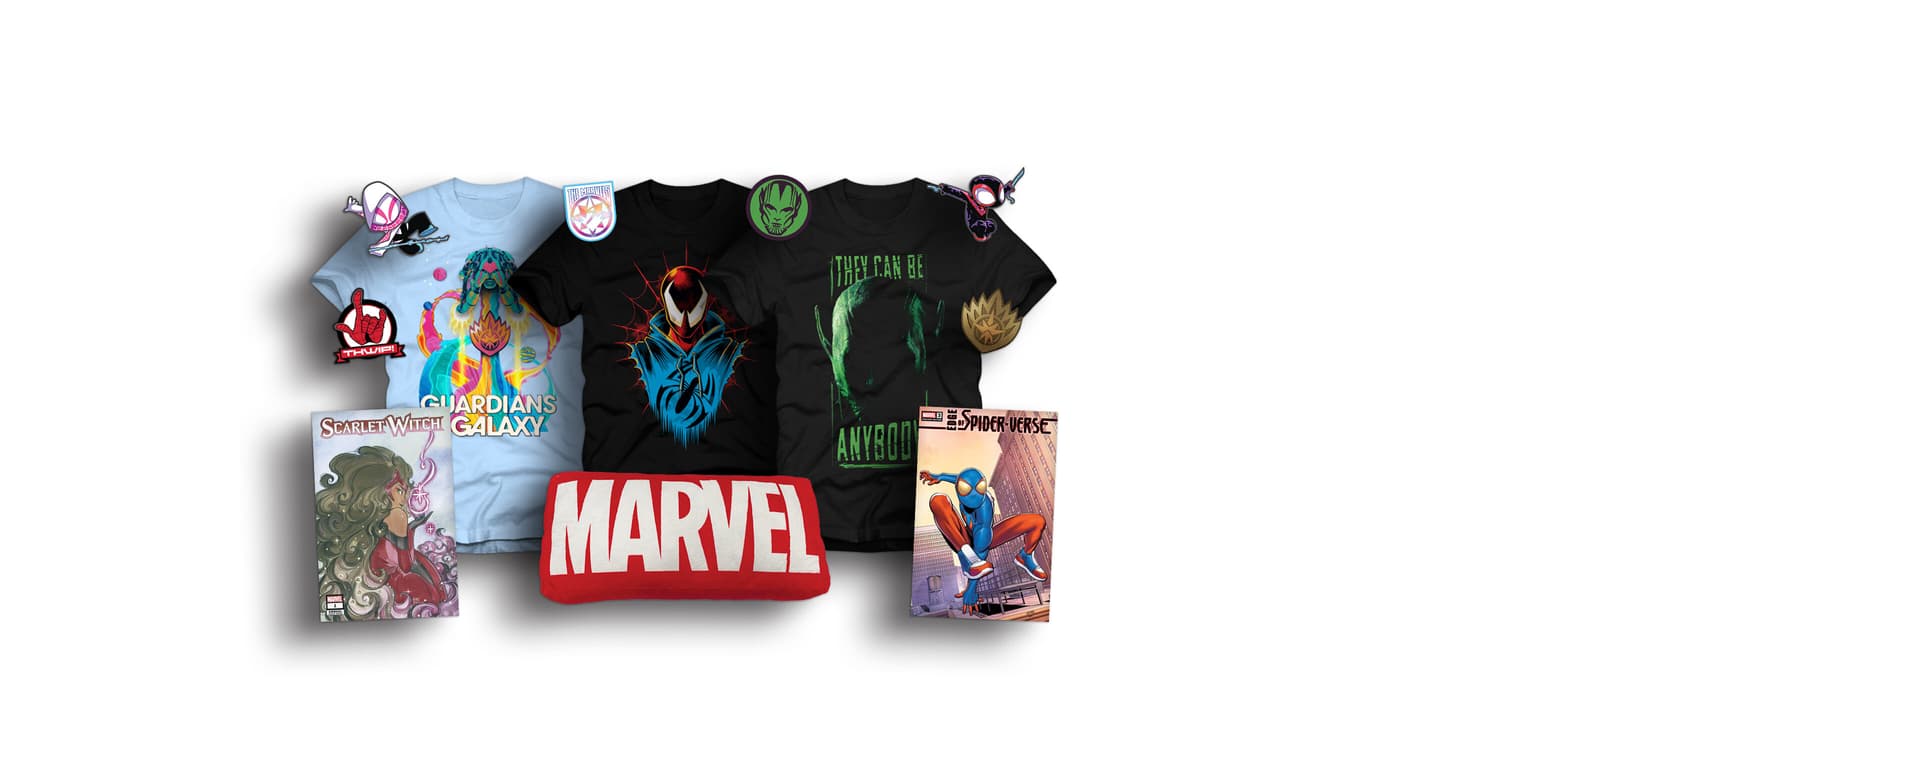 SDCC San Diego Comic-Con 2023 Marvel Booth #2519 Marvel Merchandise Comics T-shirts and more!